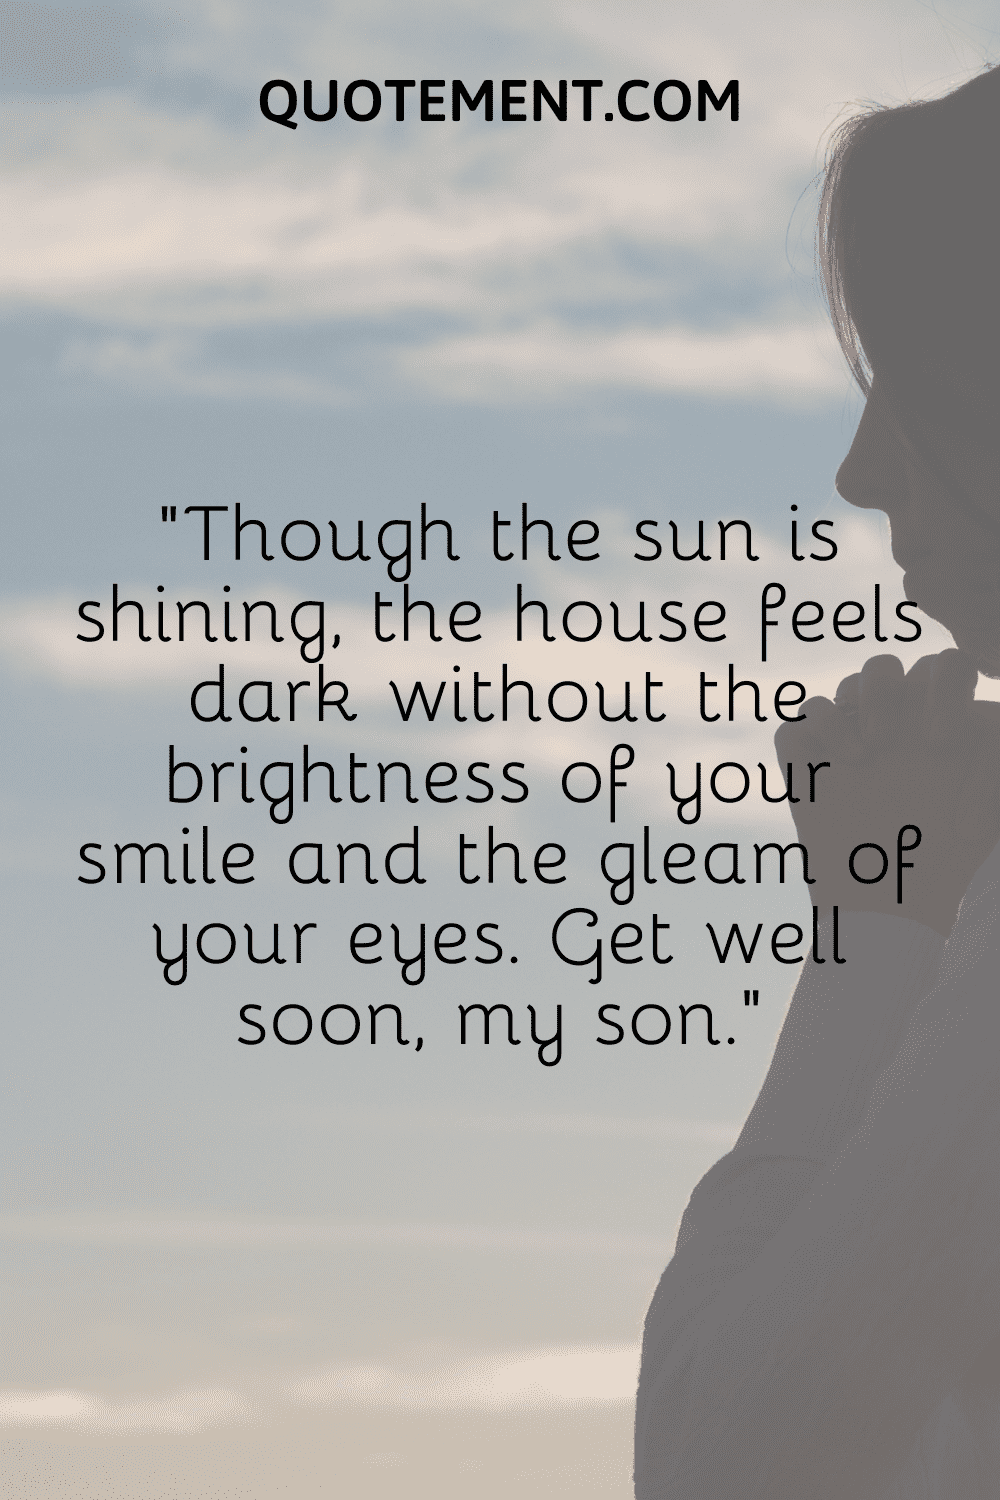 Though the sun is shining, the house feels dark without the brightness of your smile